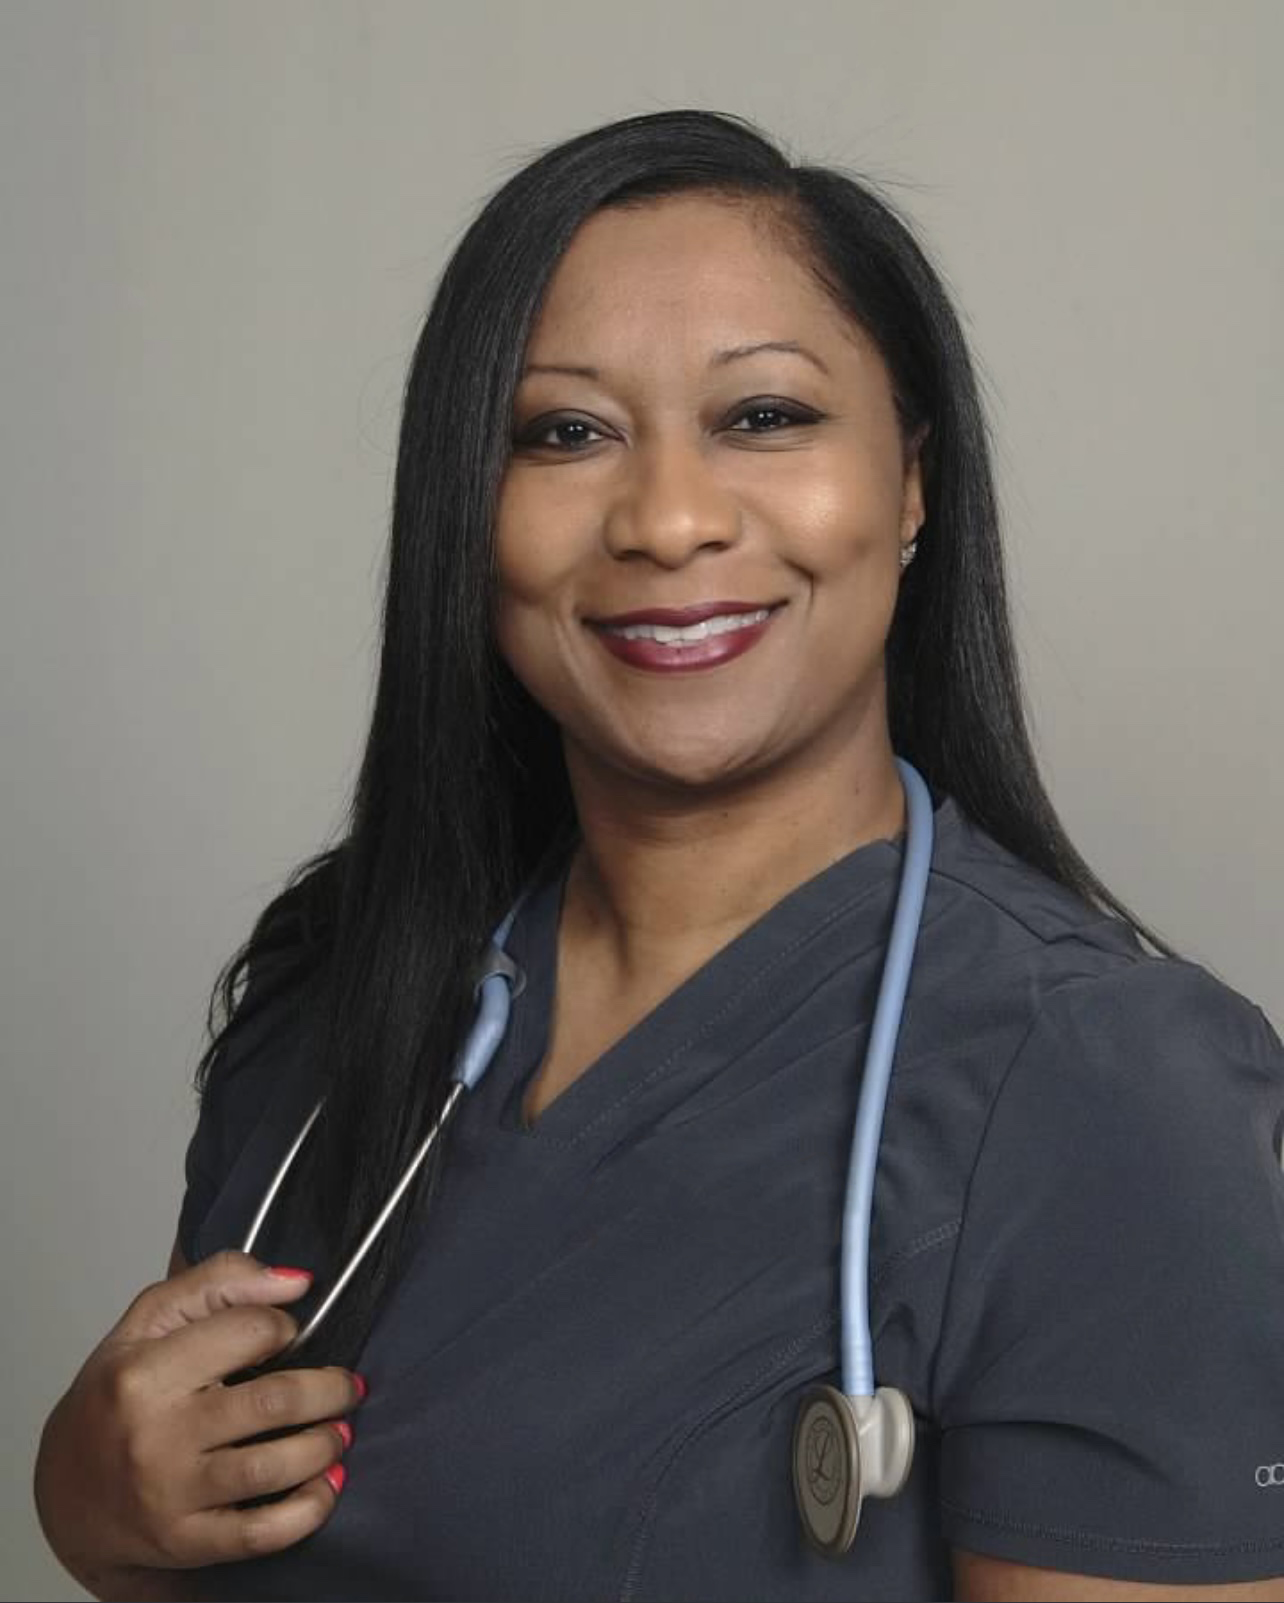 RHA is Excited to Announce Tormeica Allison as the Executive Director of Care Management